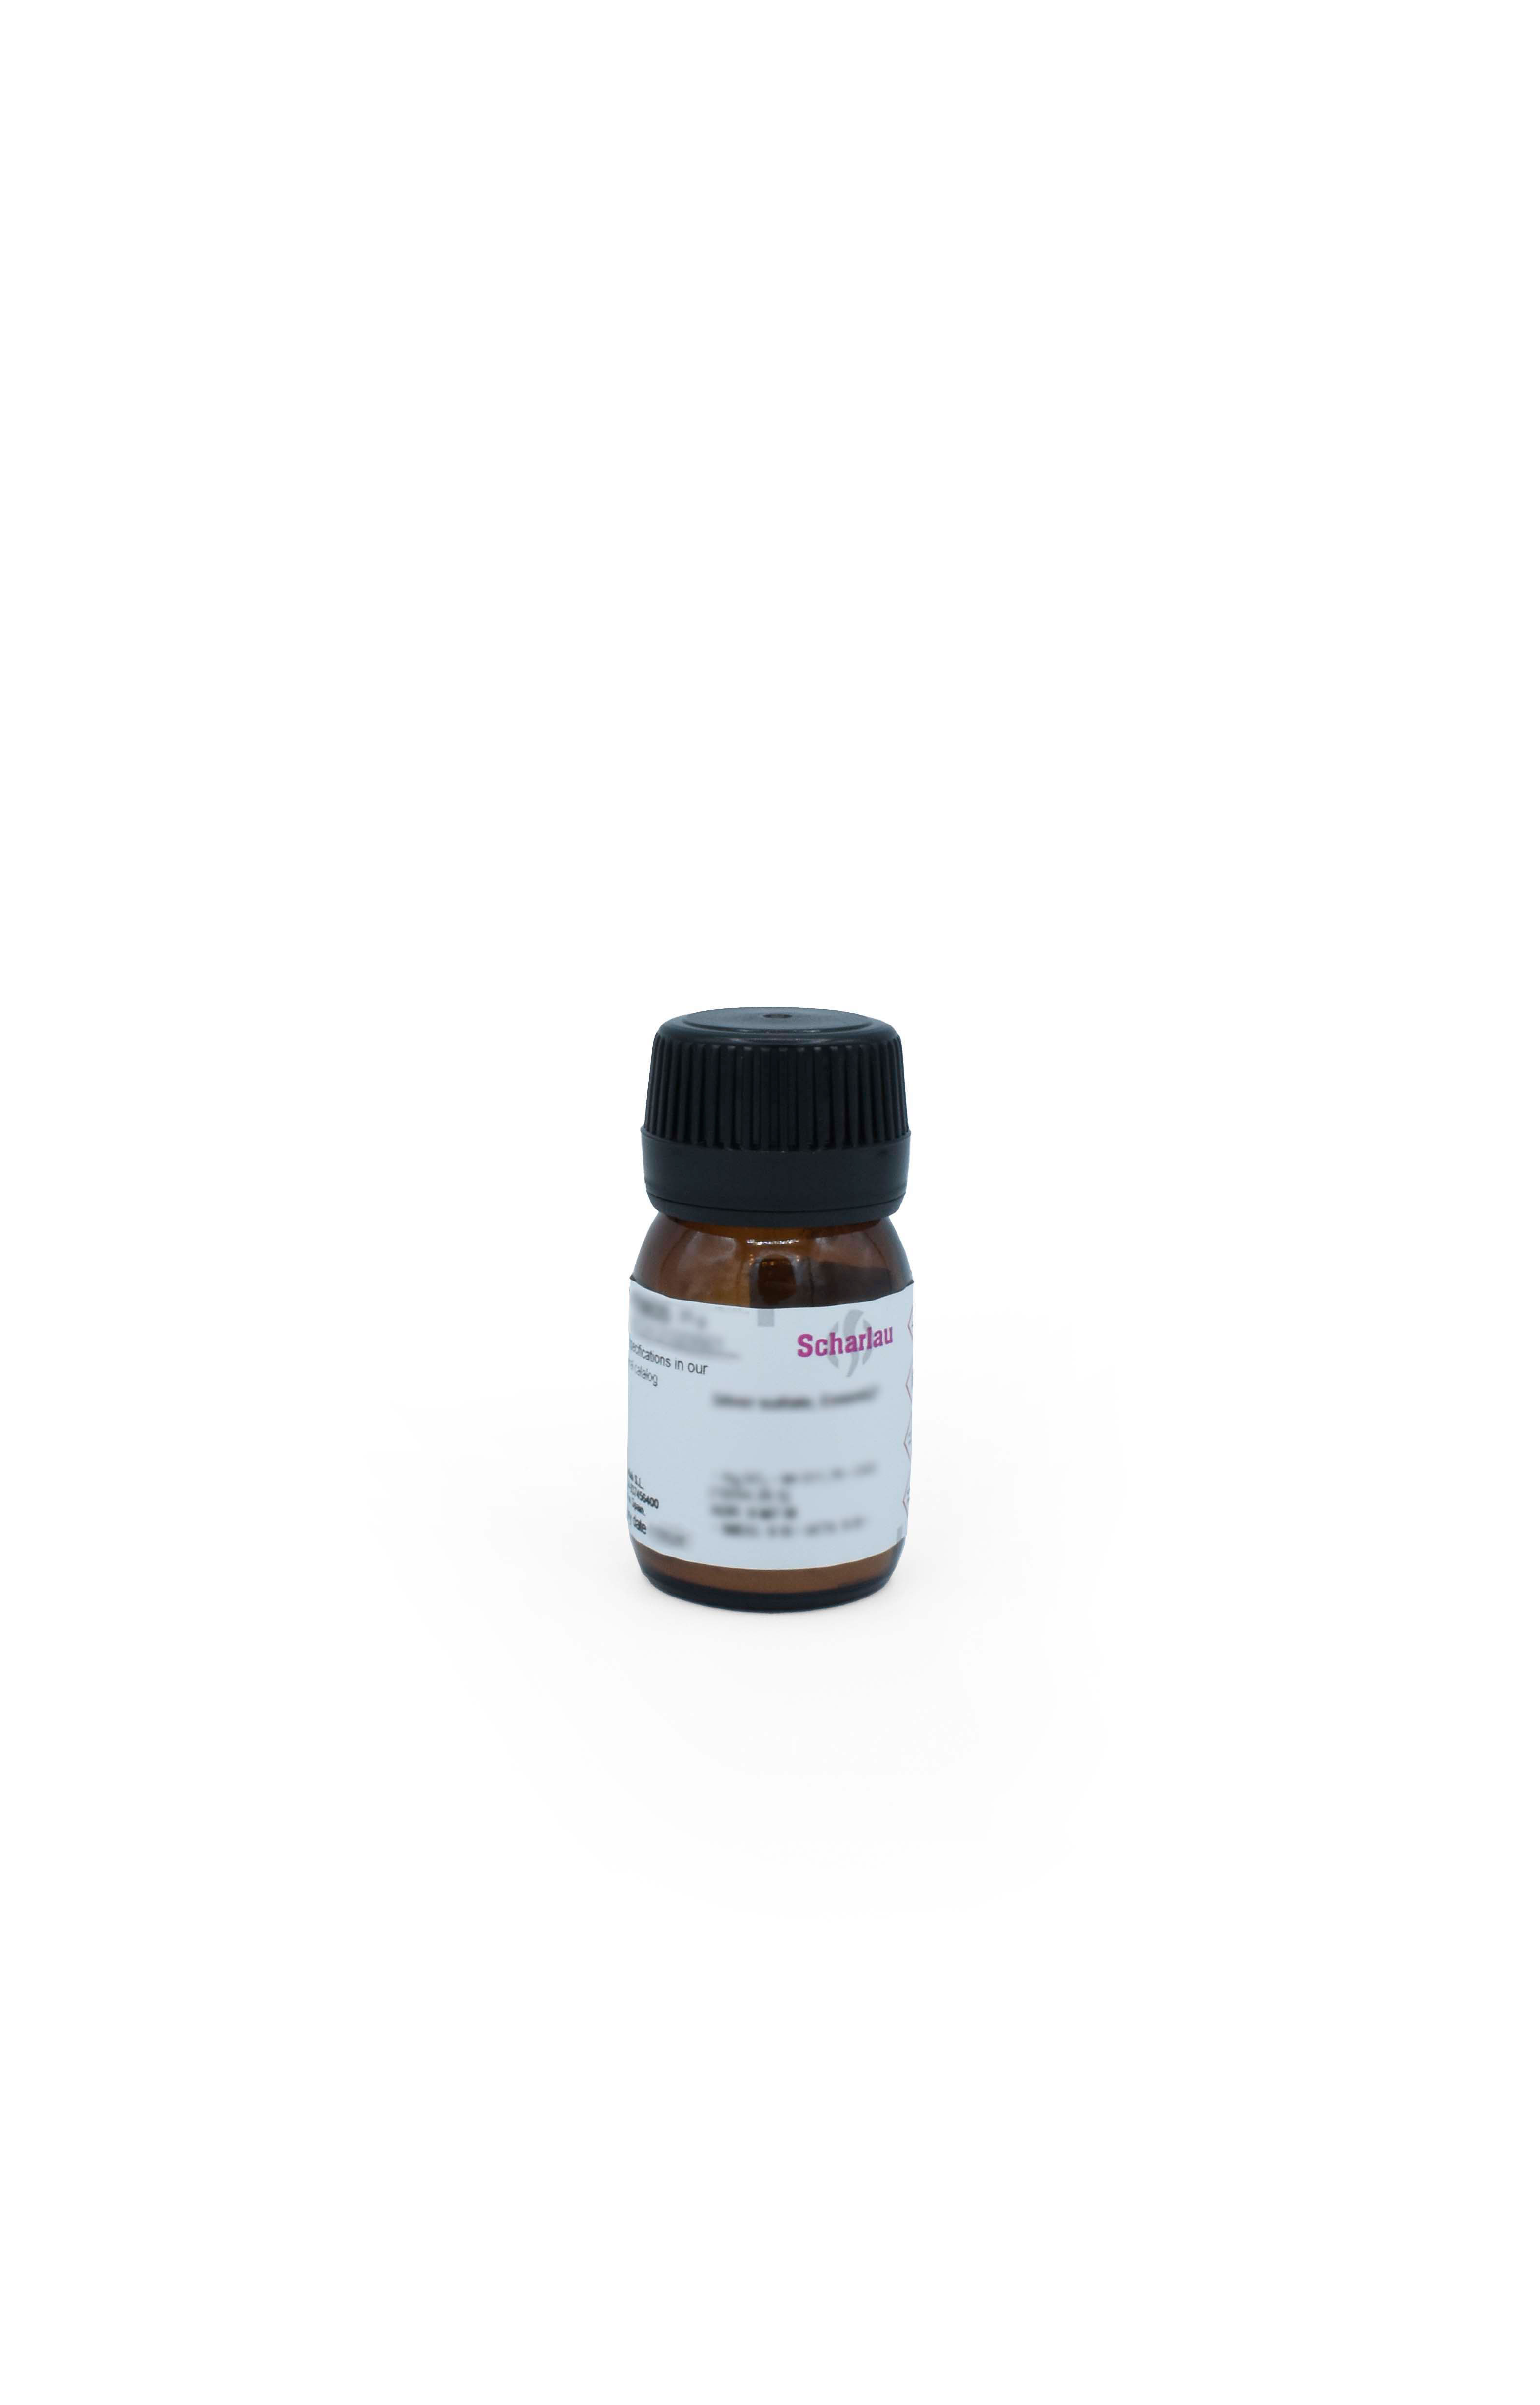 Indole, for analysis, ExpertQ®